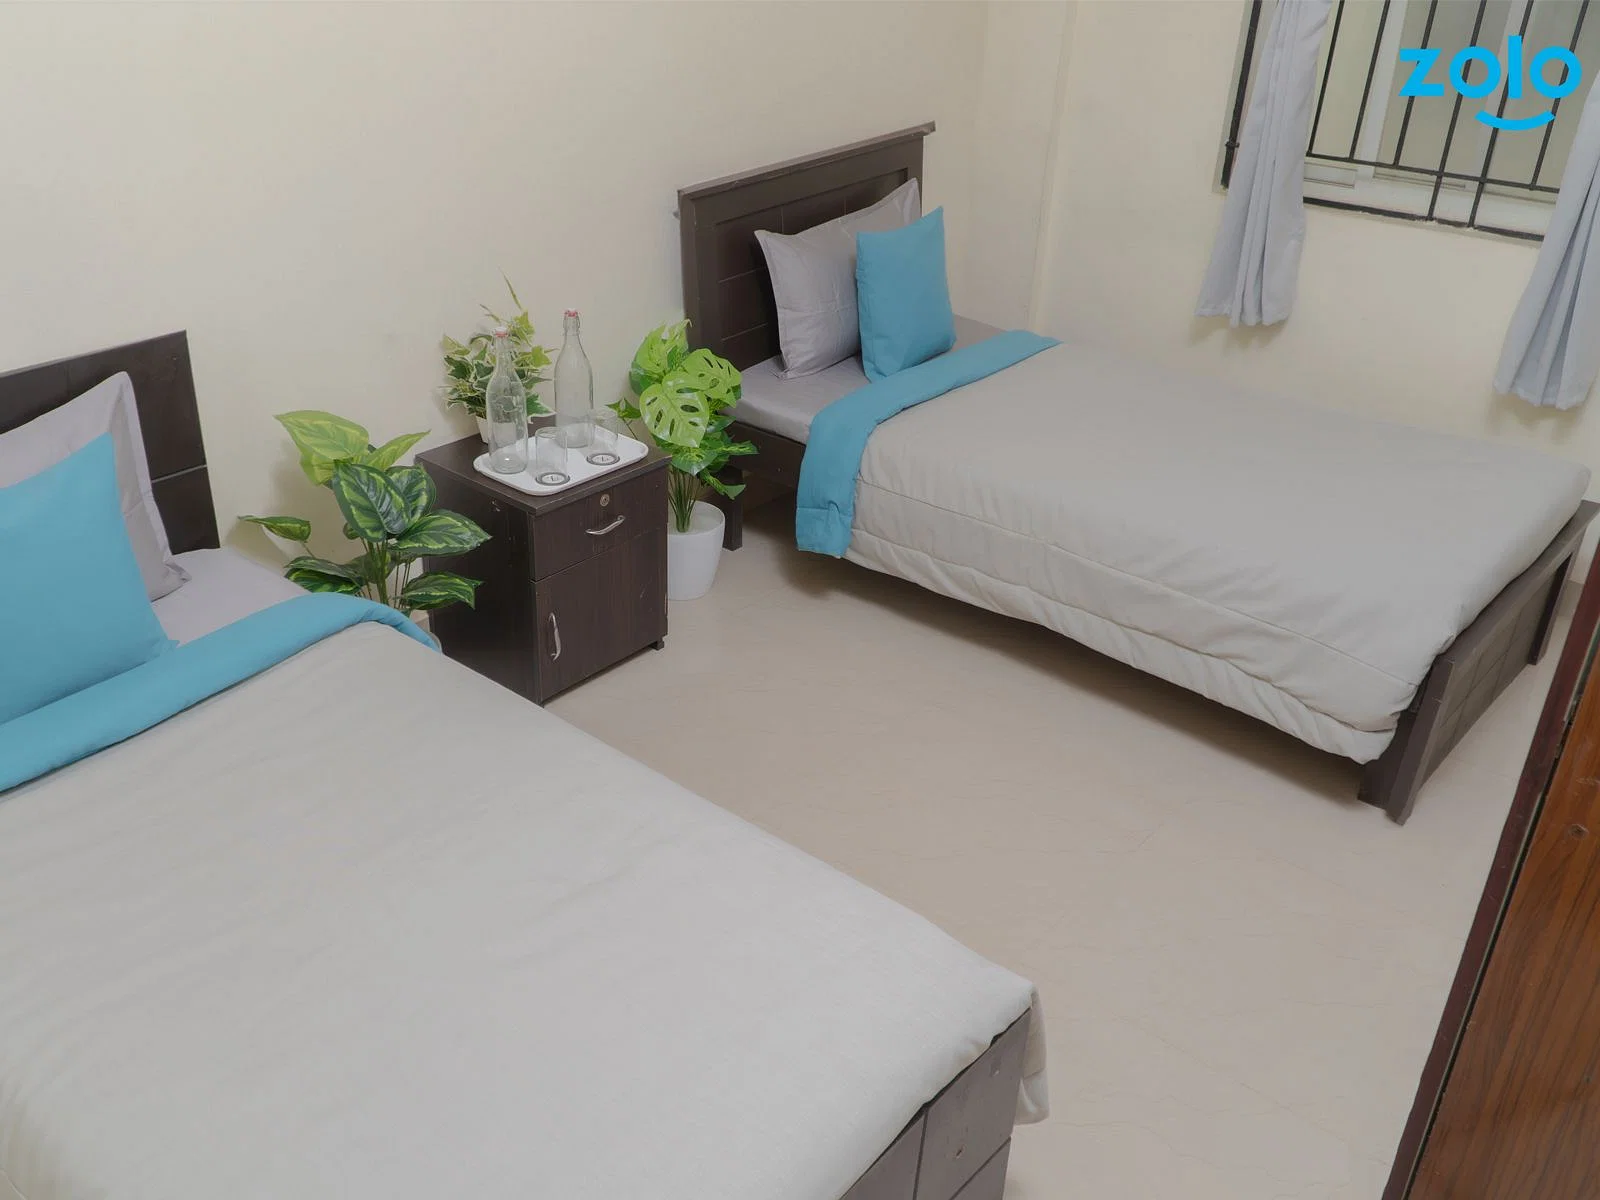 pgs in Sarjapura with Daily housekeeping facilities and free Wi-Fi-Zolo Helios